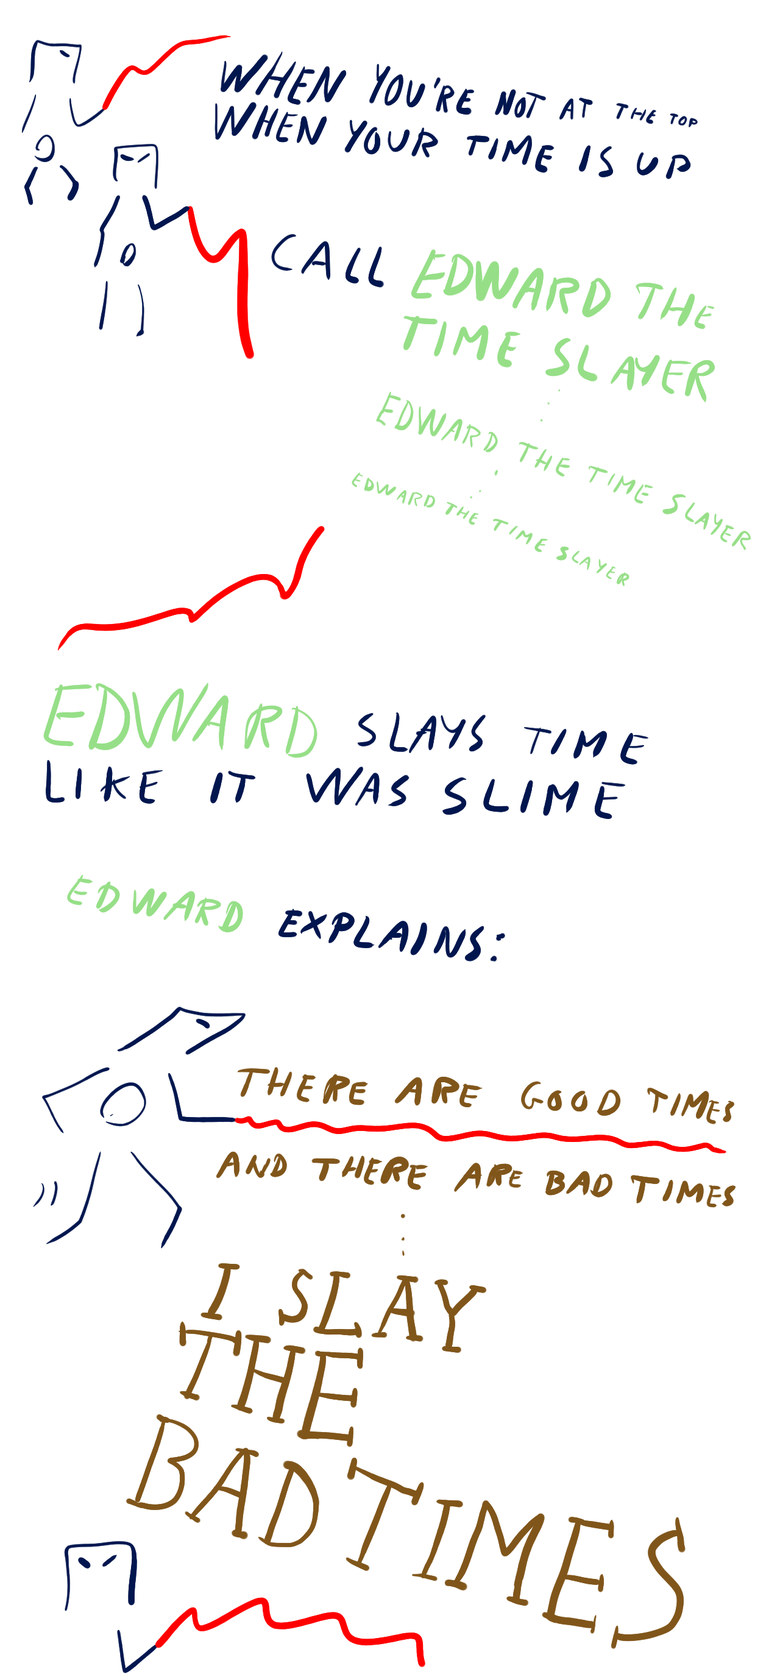 Temporal events cause Edward-sniffable scents.